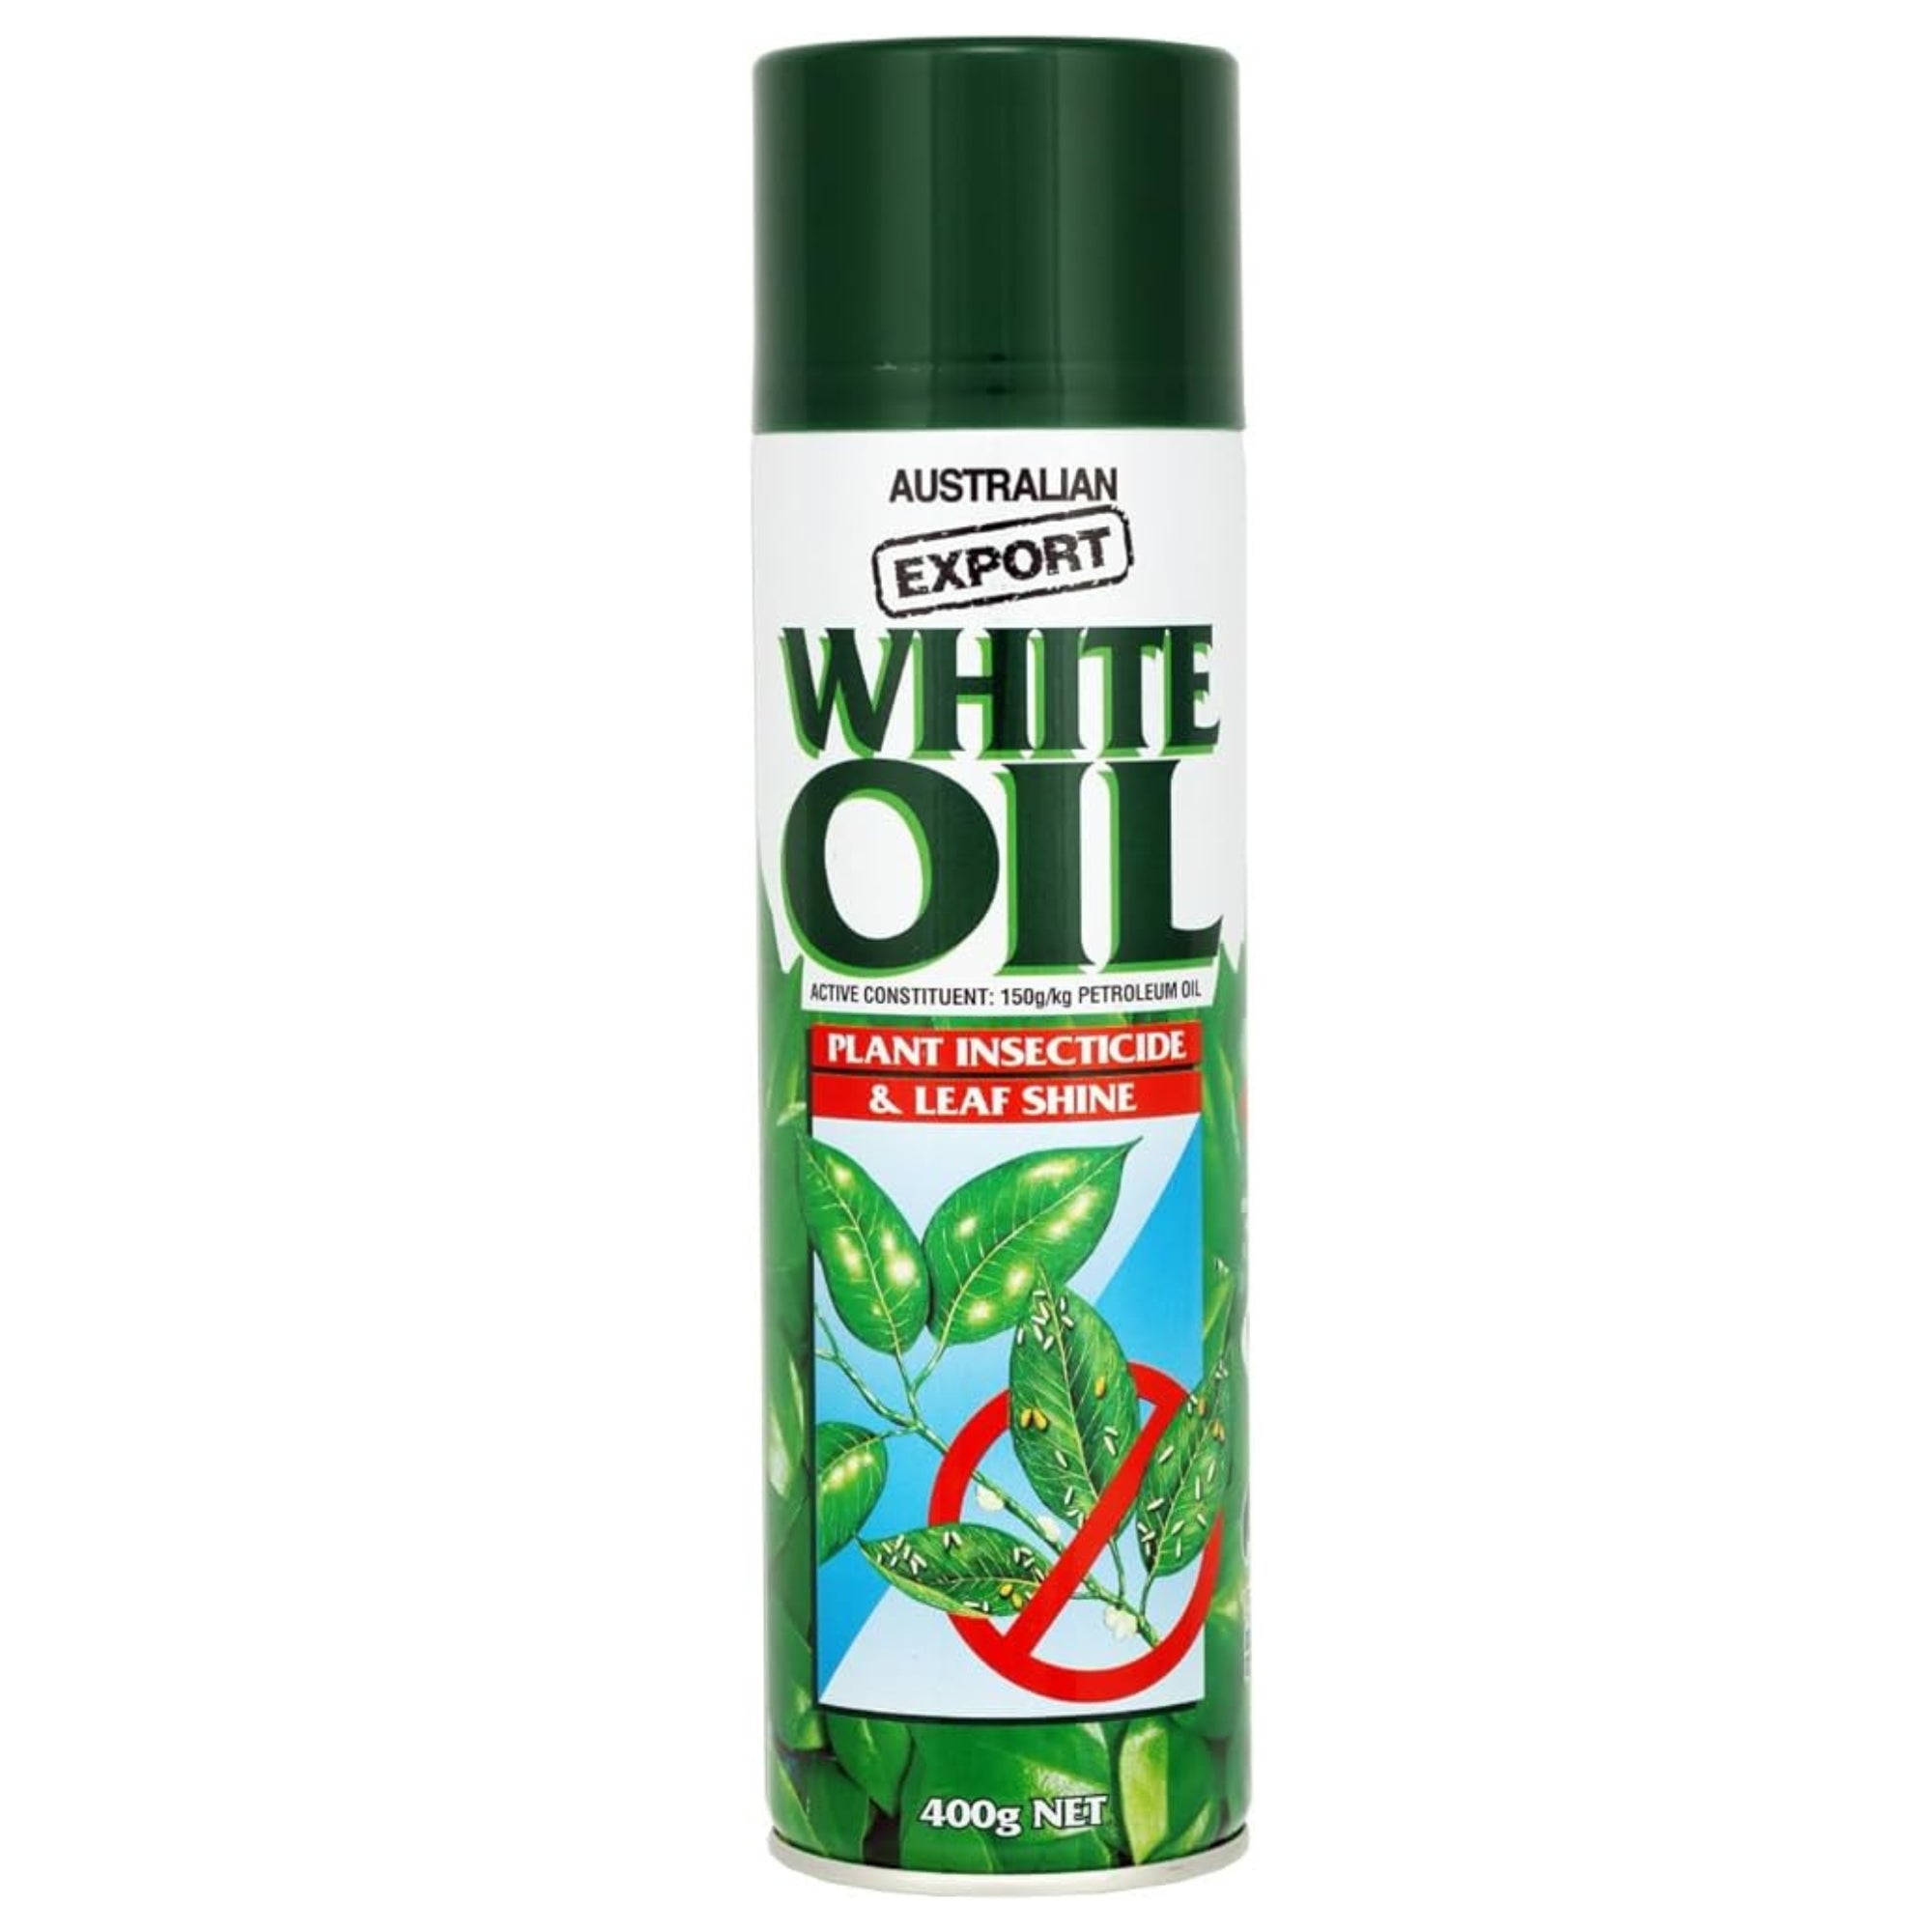 Australian Export White Oil Plant Insecticide Spray All Natural 400gm | EX1001 - South East Clearance Centre